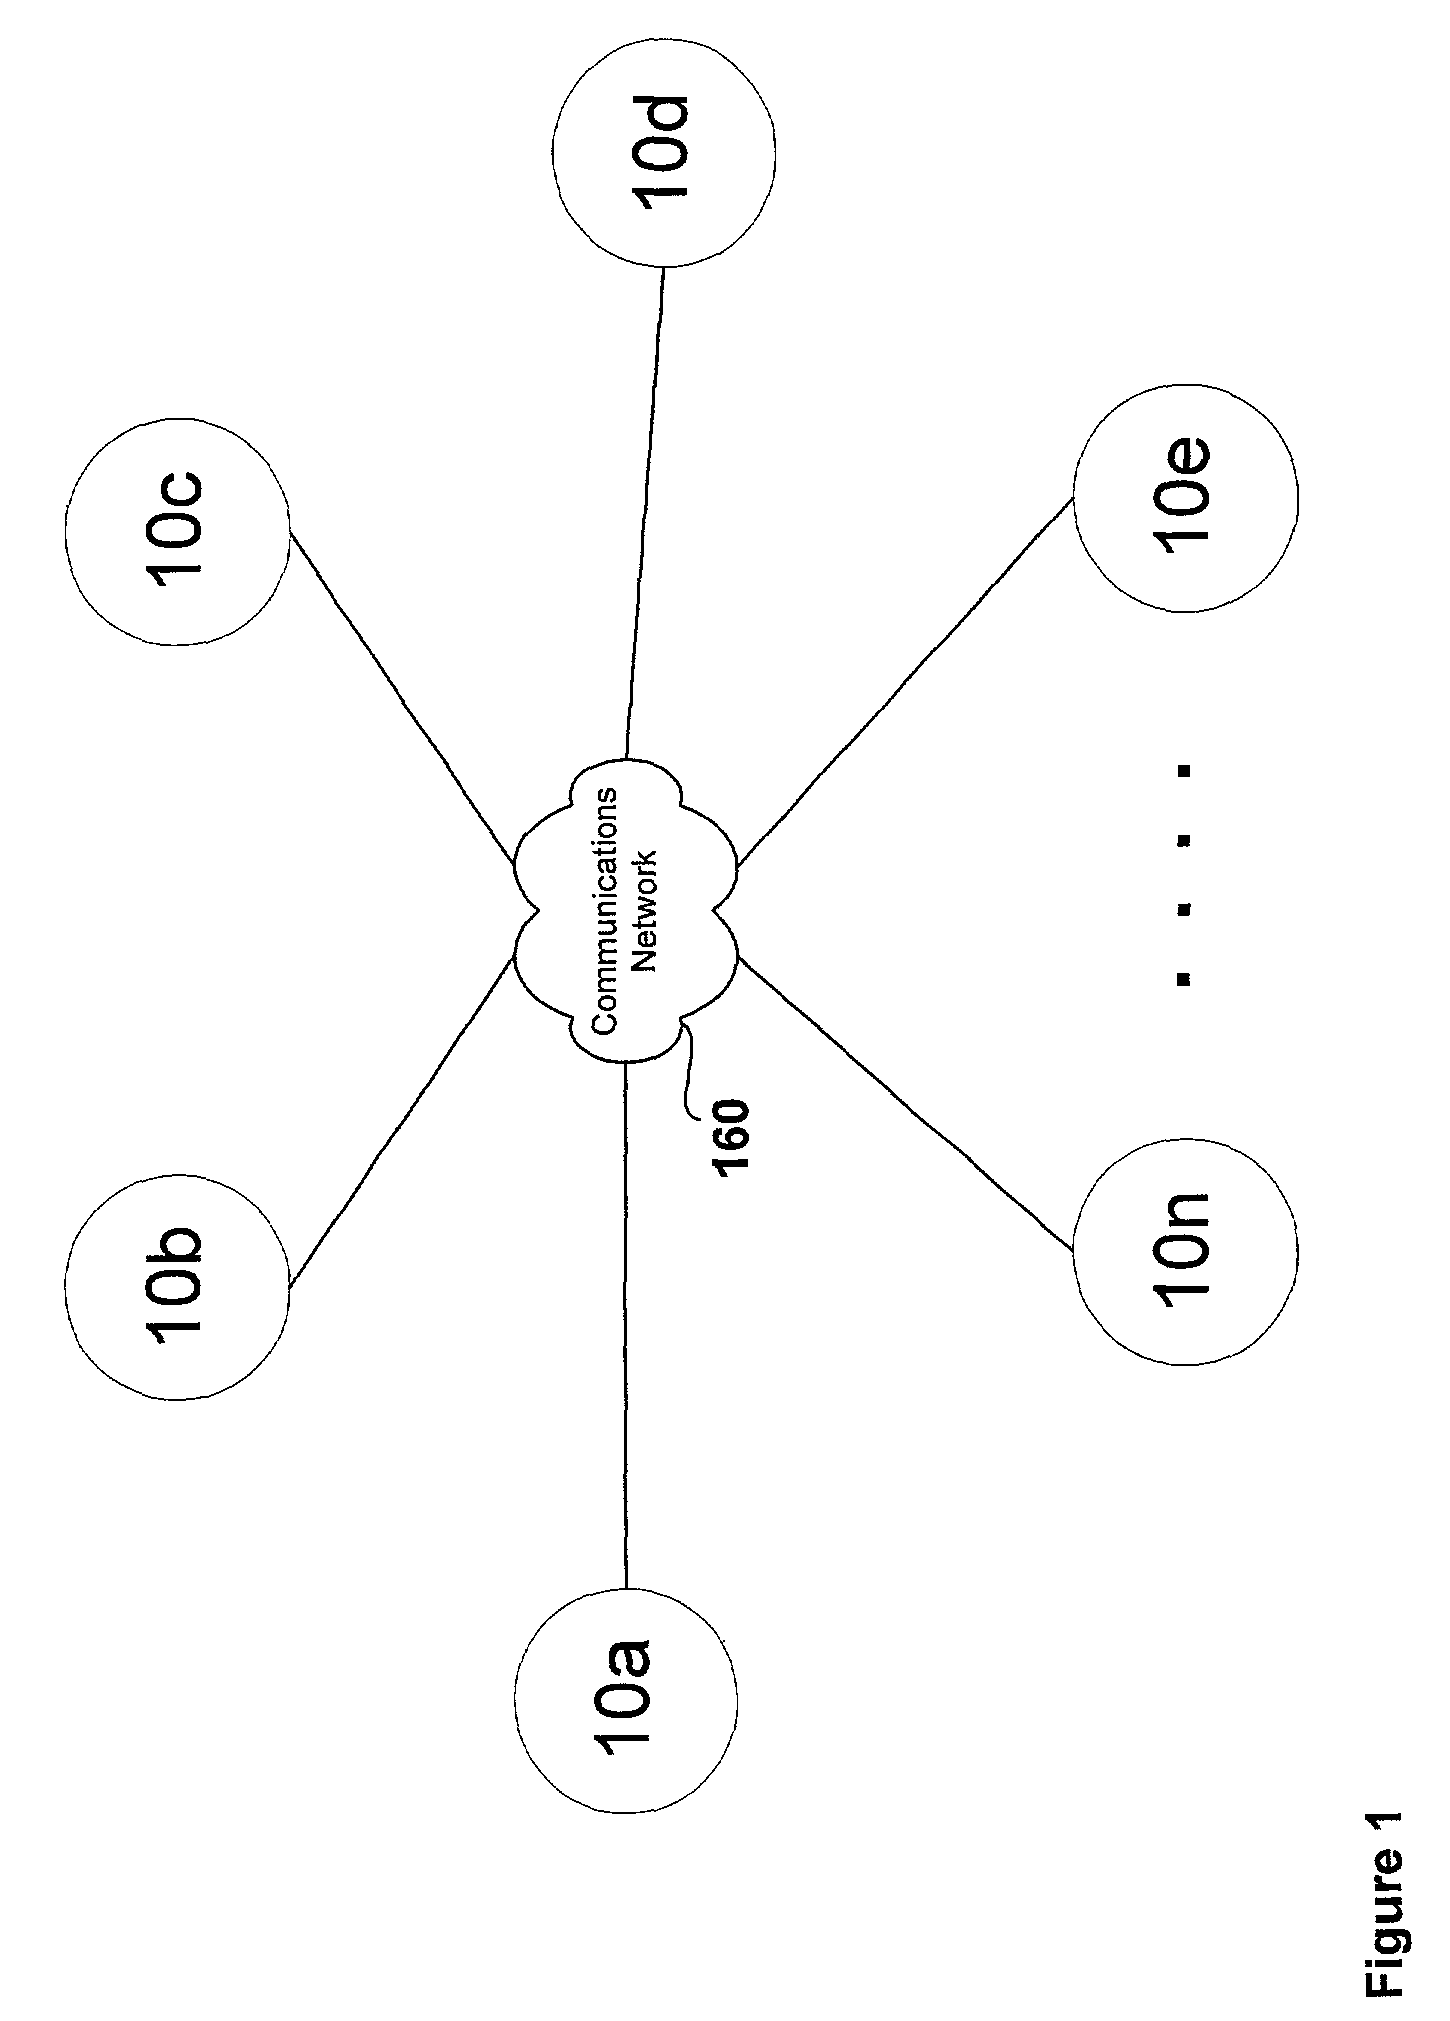 Method and system for providing a distributed querying and filtering system